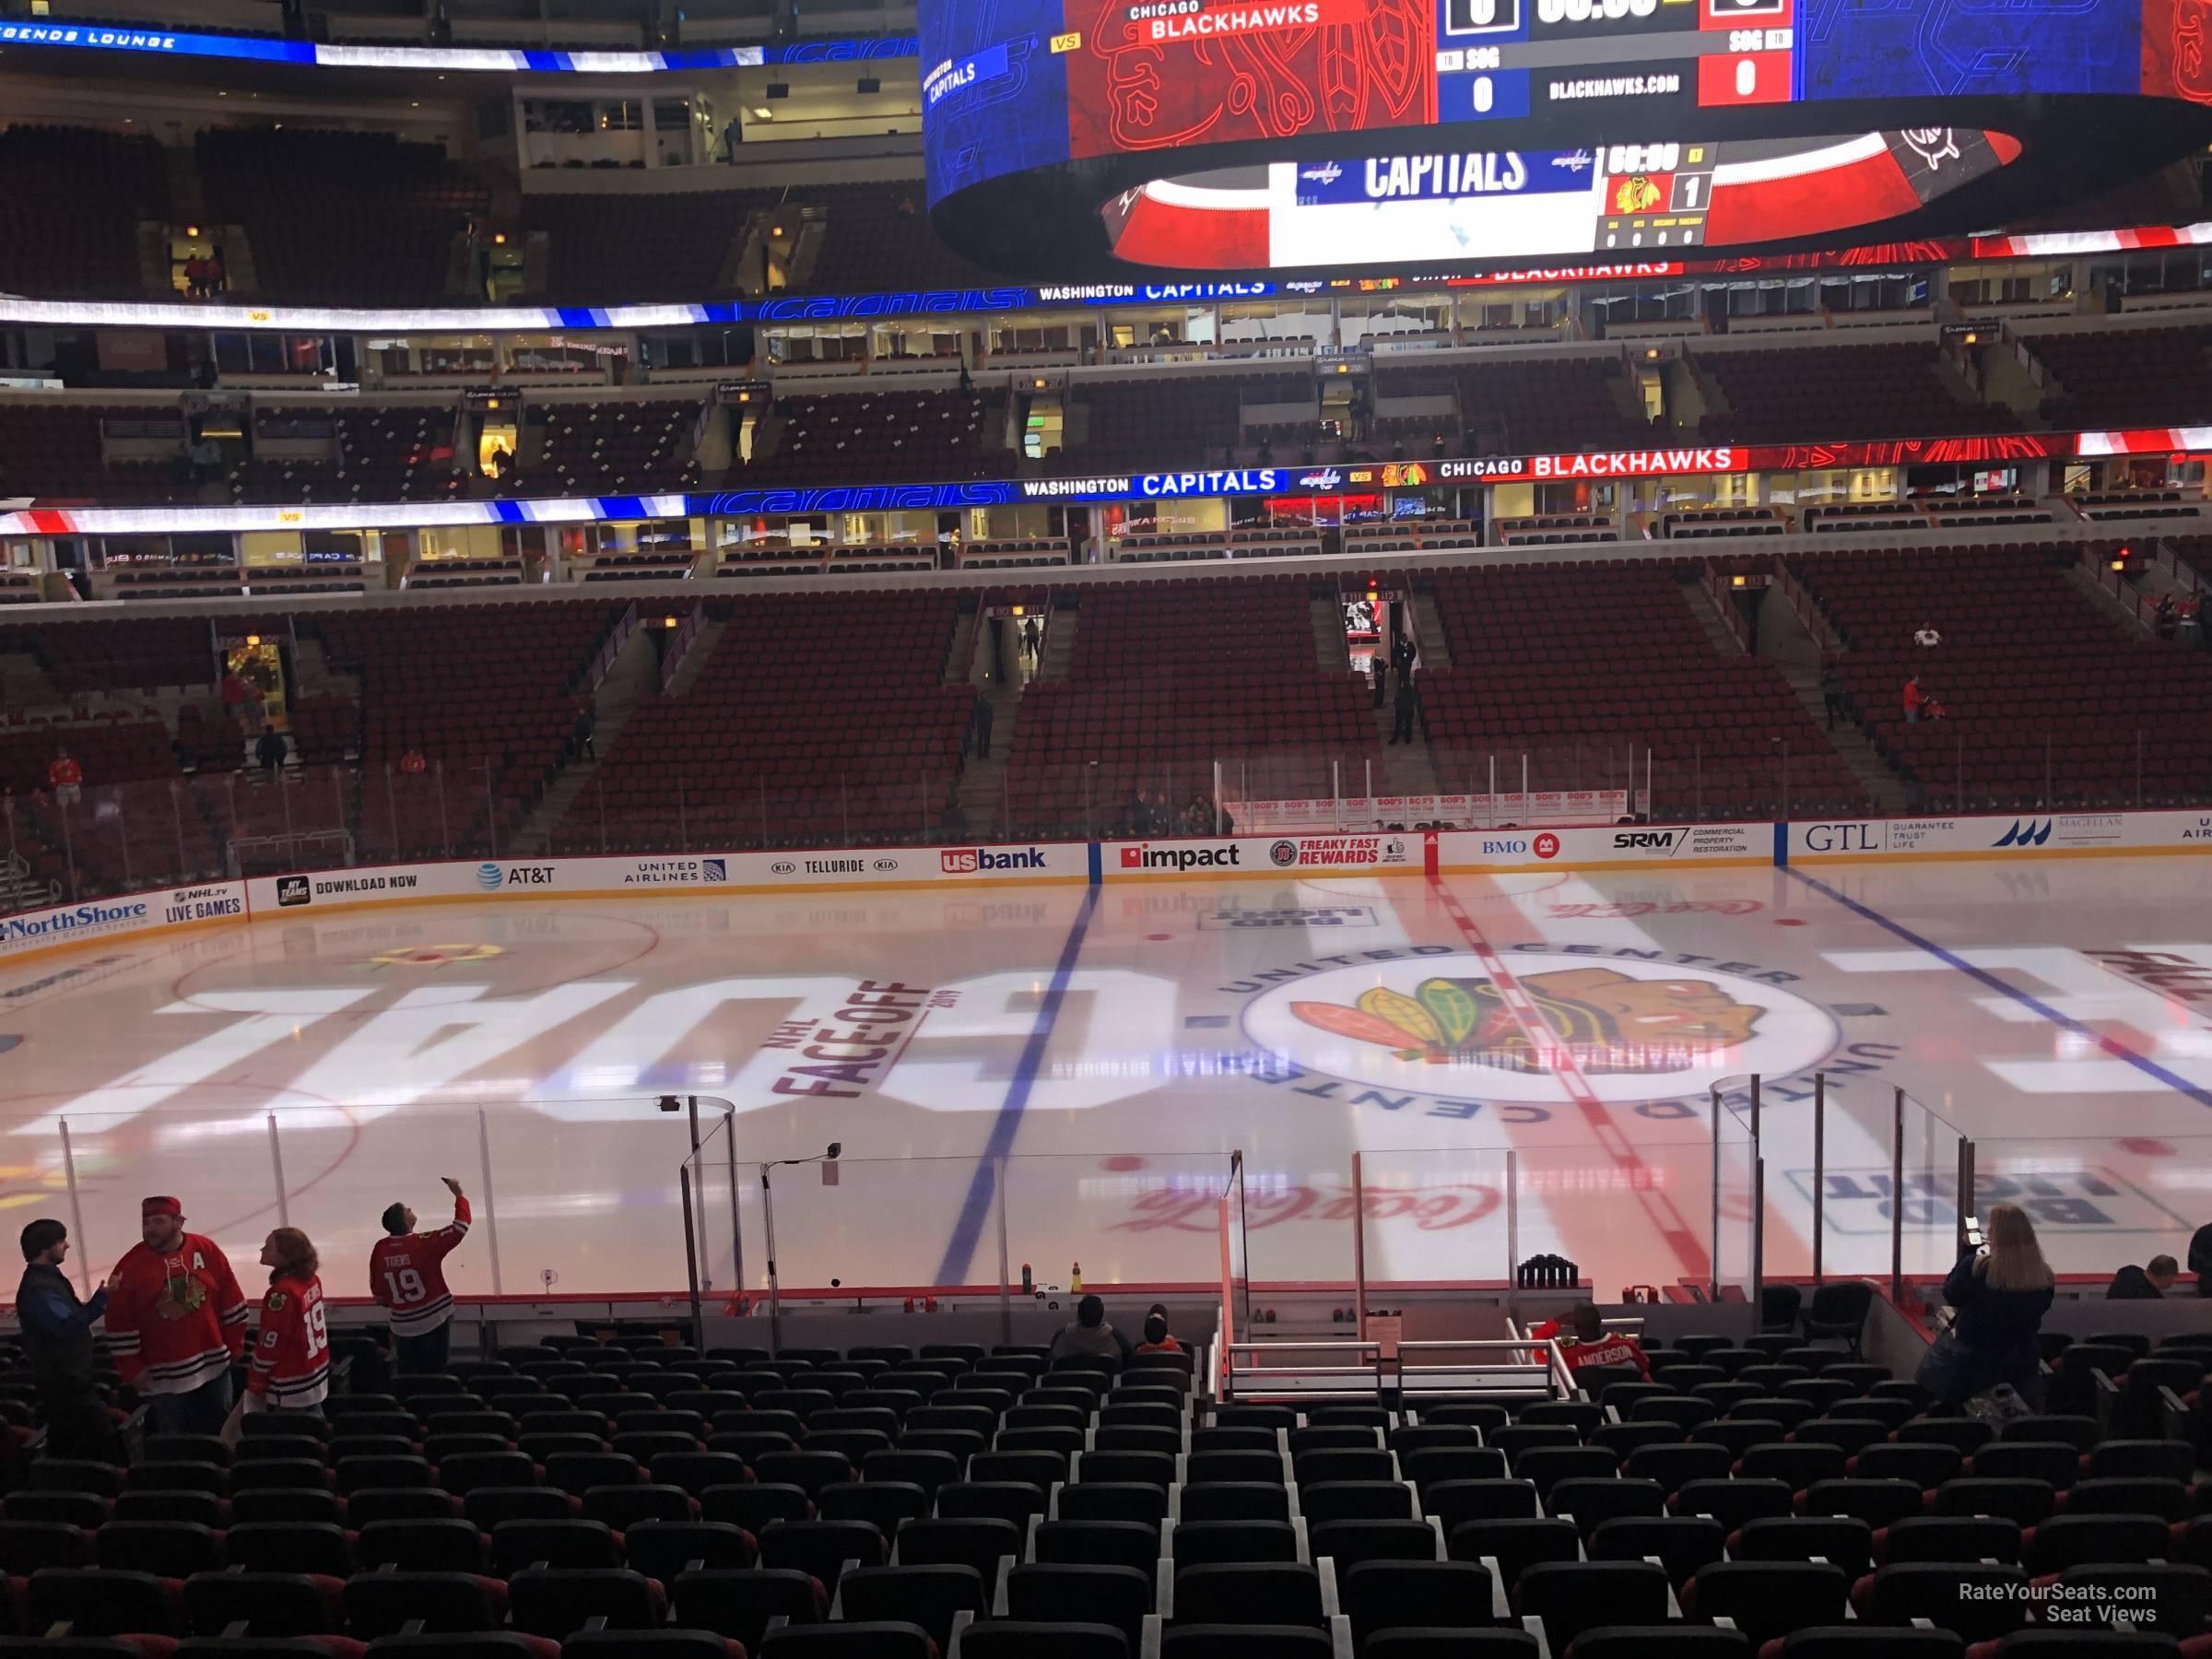 Section 101 at United Center 